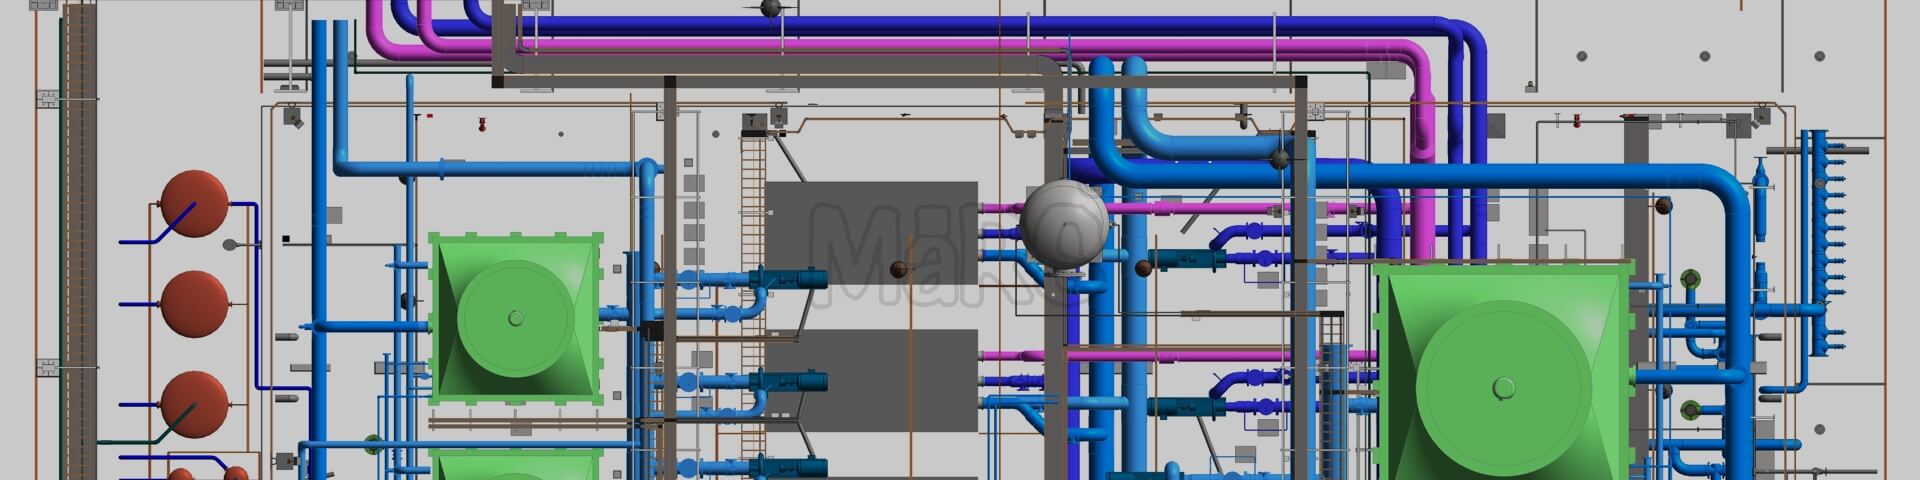 MEP BIM Modeling for water tanks and pump rooms